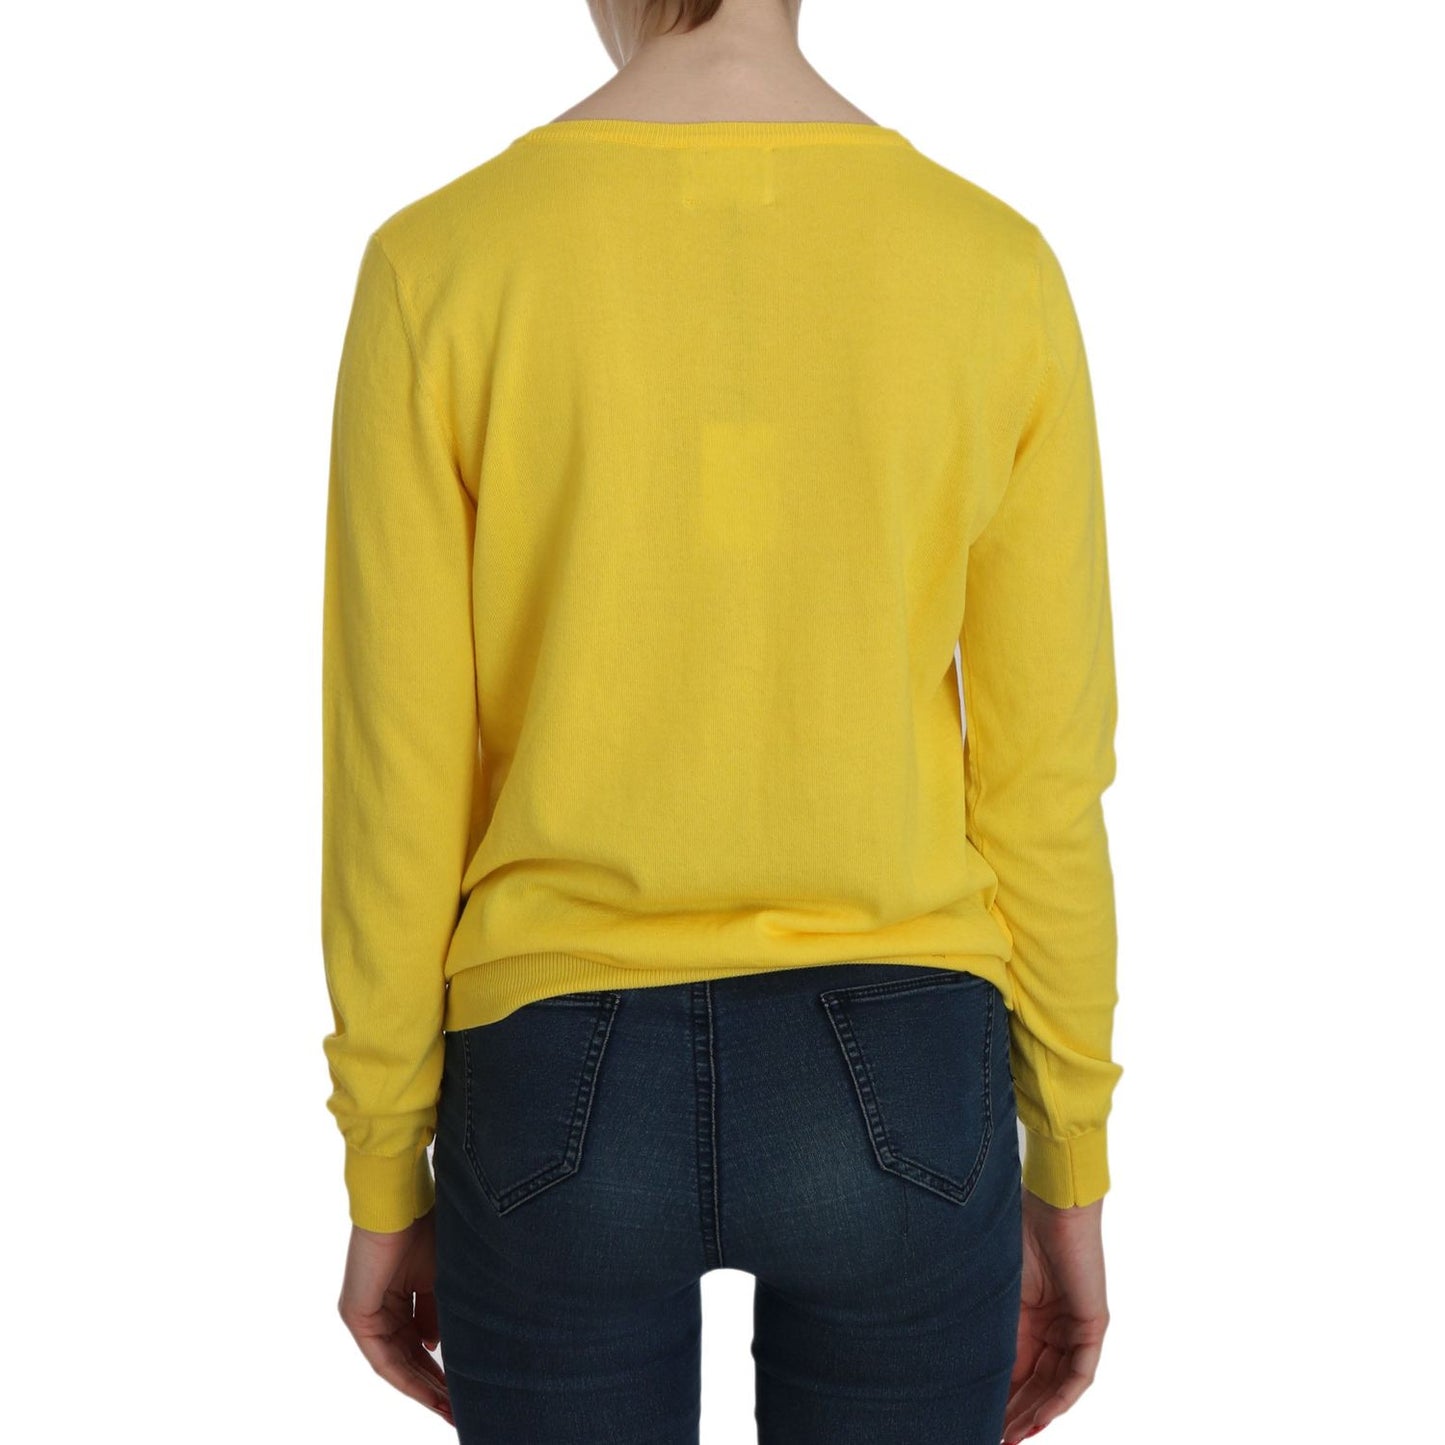 Jucca Radiant Yellow Cotton Sweater yellow-cotton-buttonfront-long-sleeve-sweater